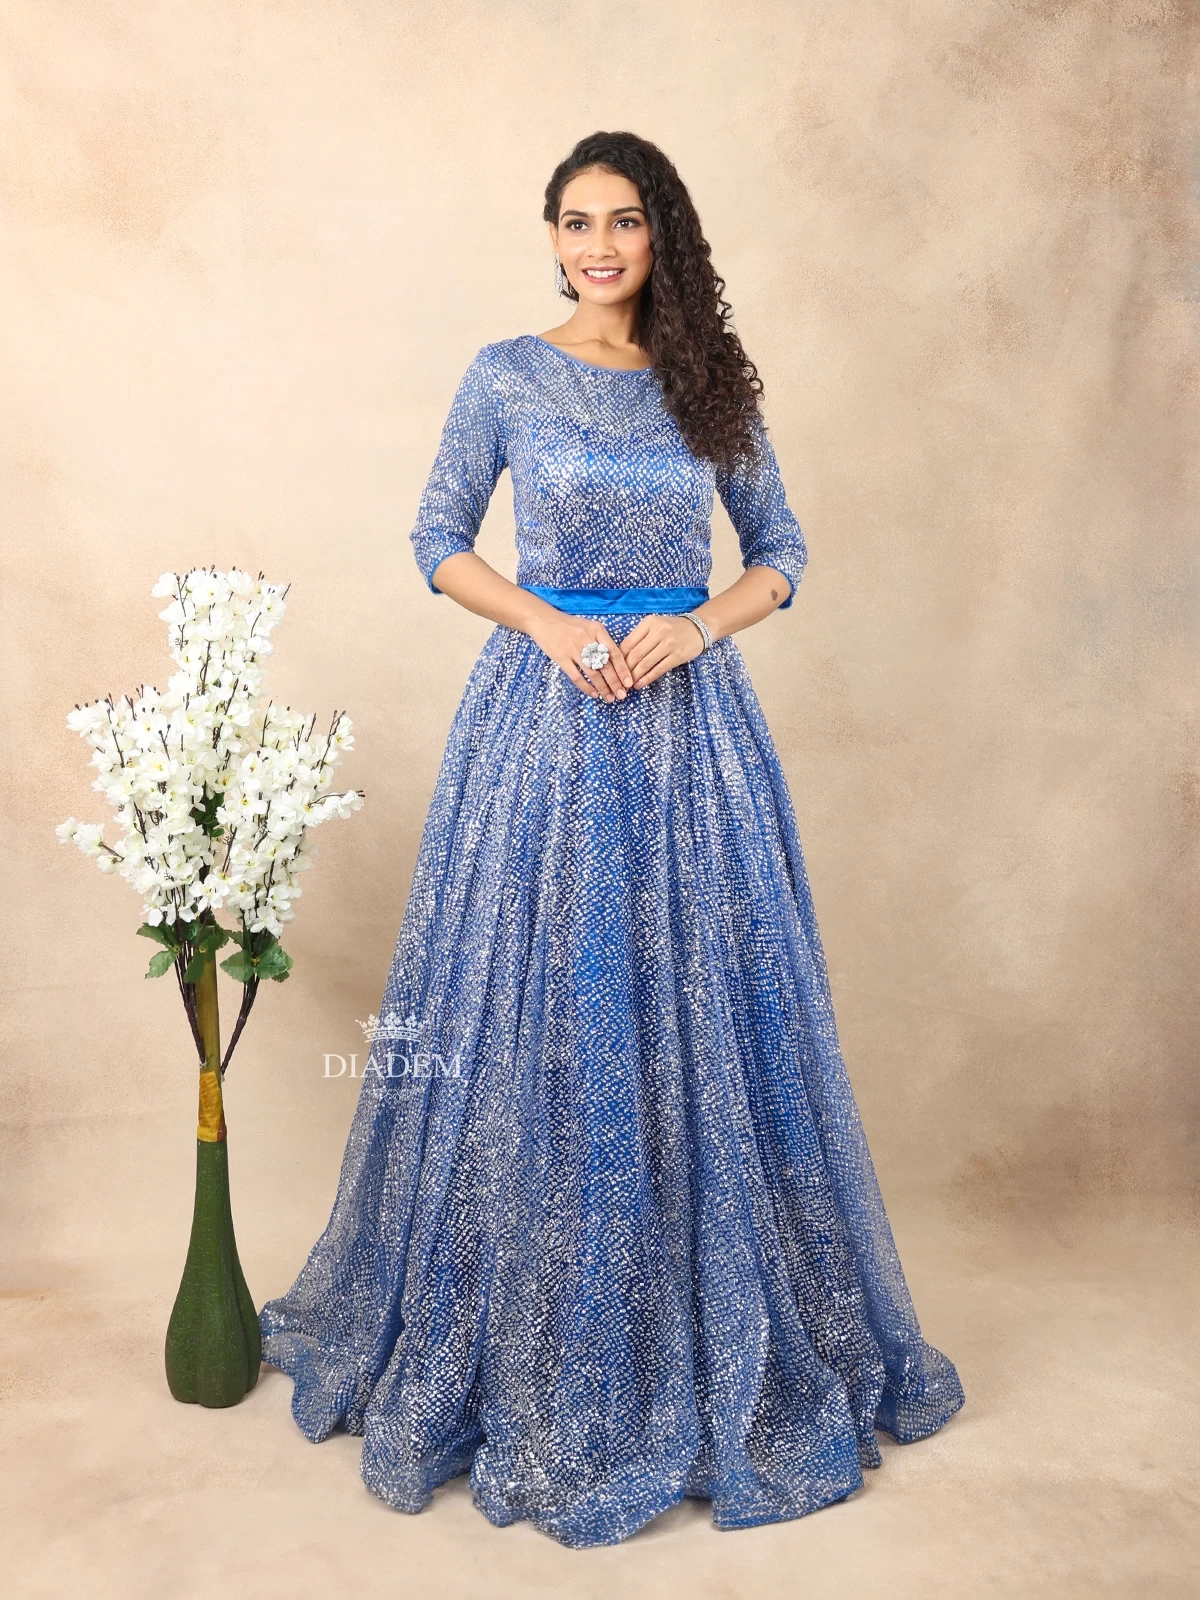 Royal Blue Ball Gown Adorned With Glitters